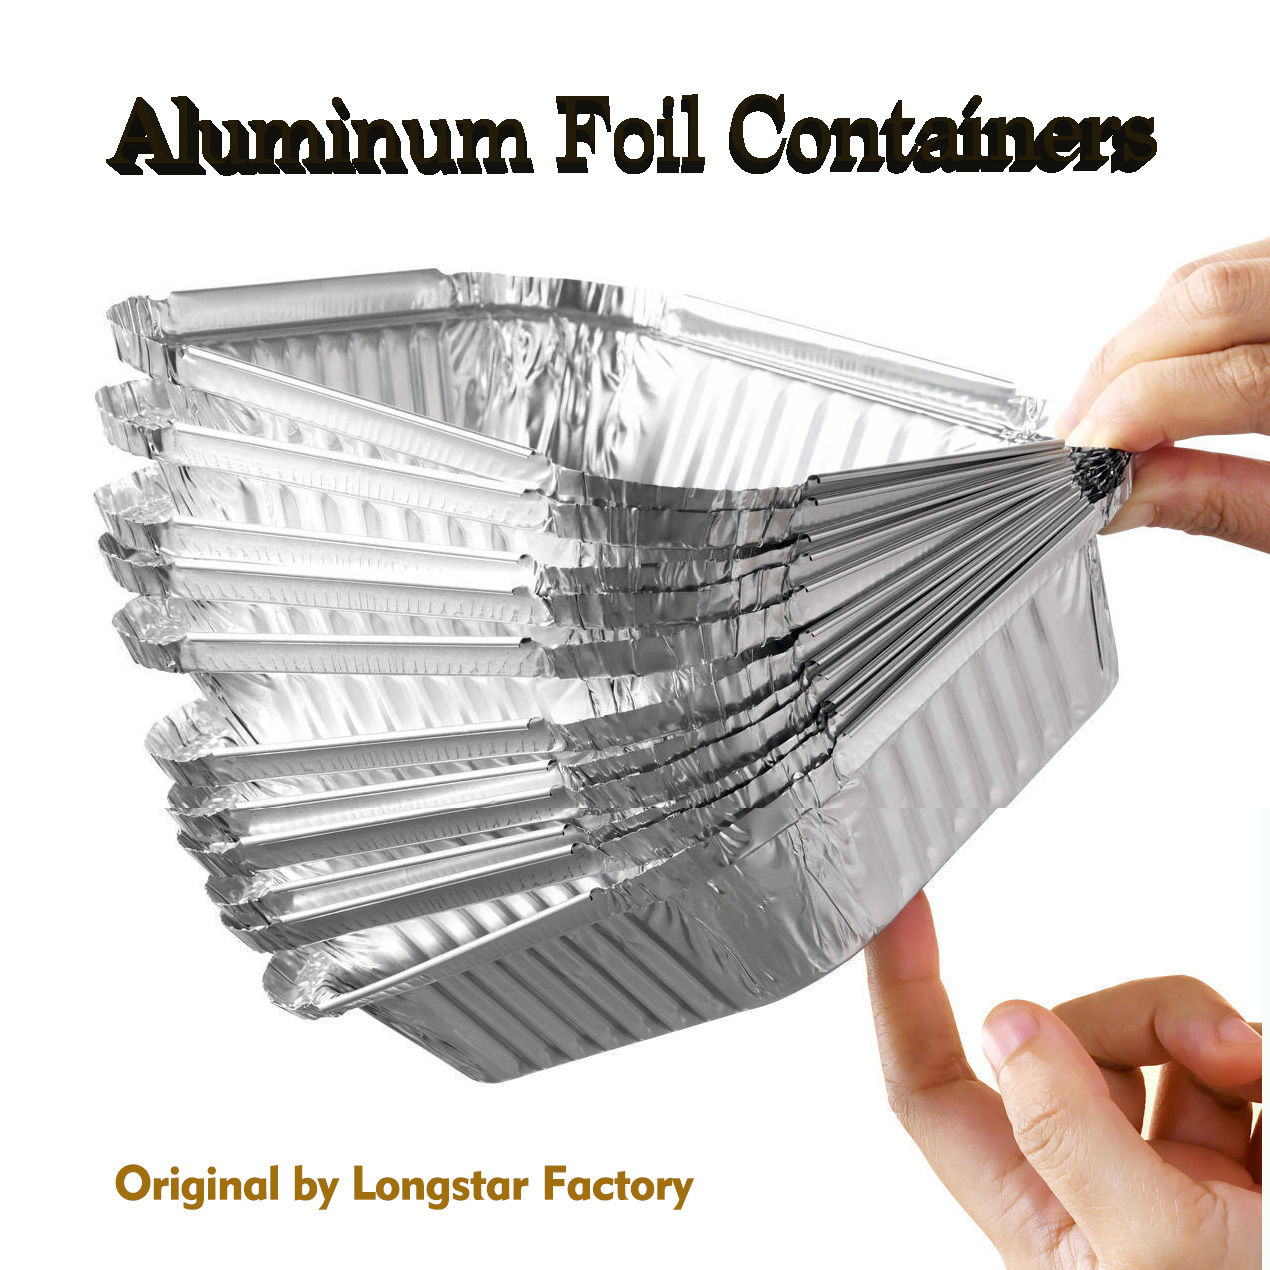 What Are The Advantages And Uses Of Aluminum Foil Containers?